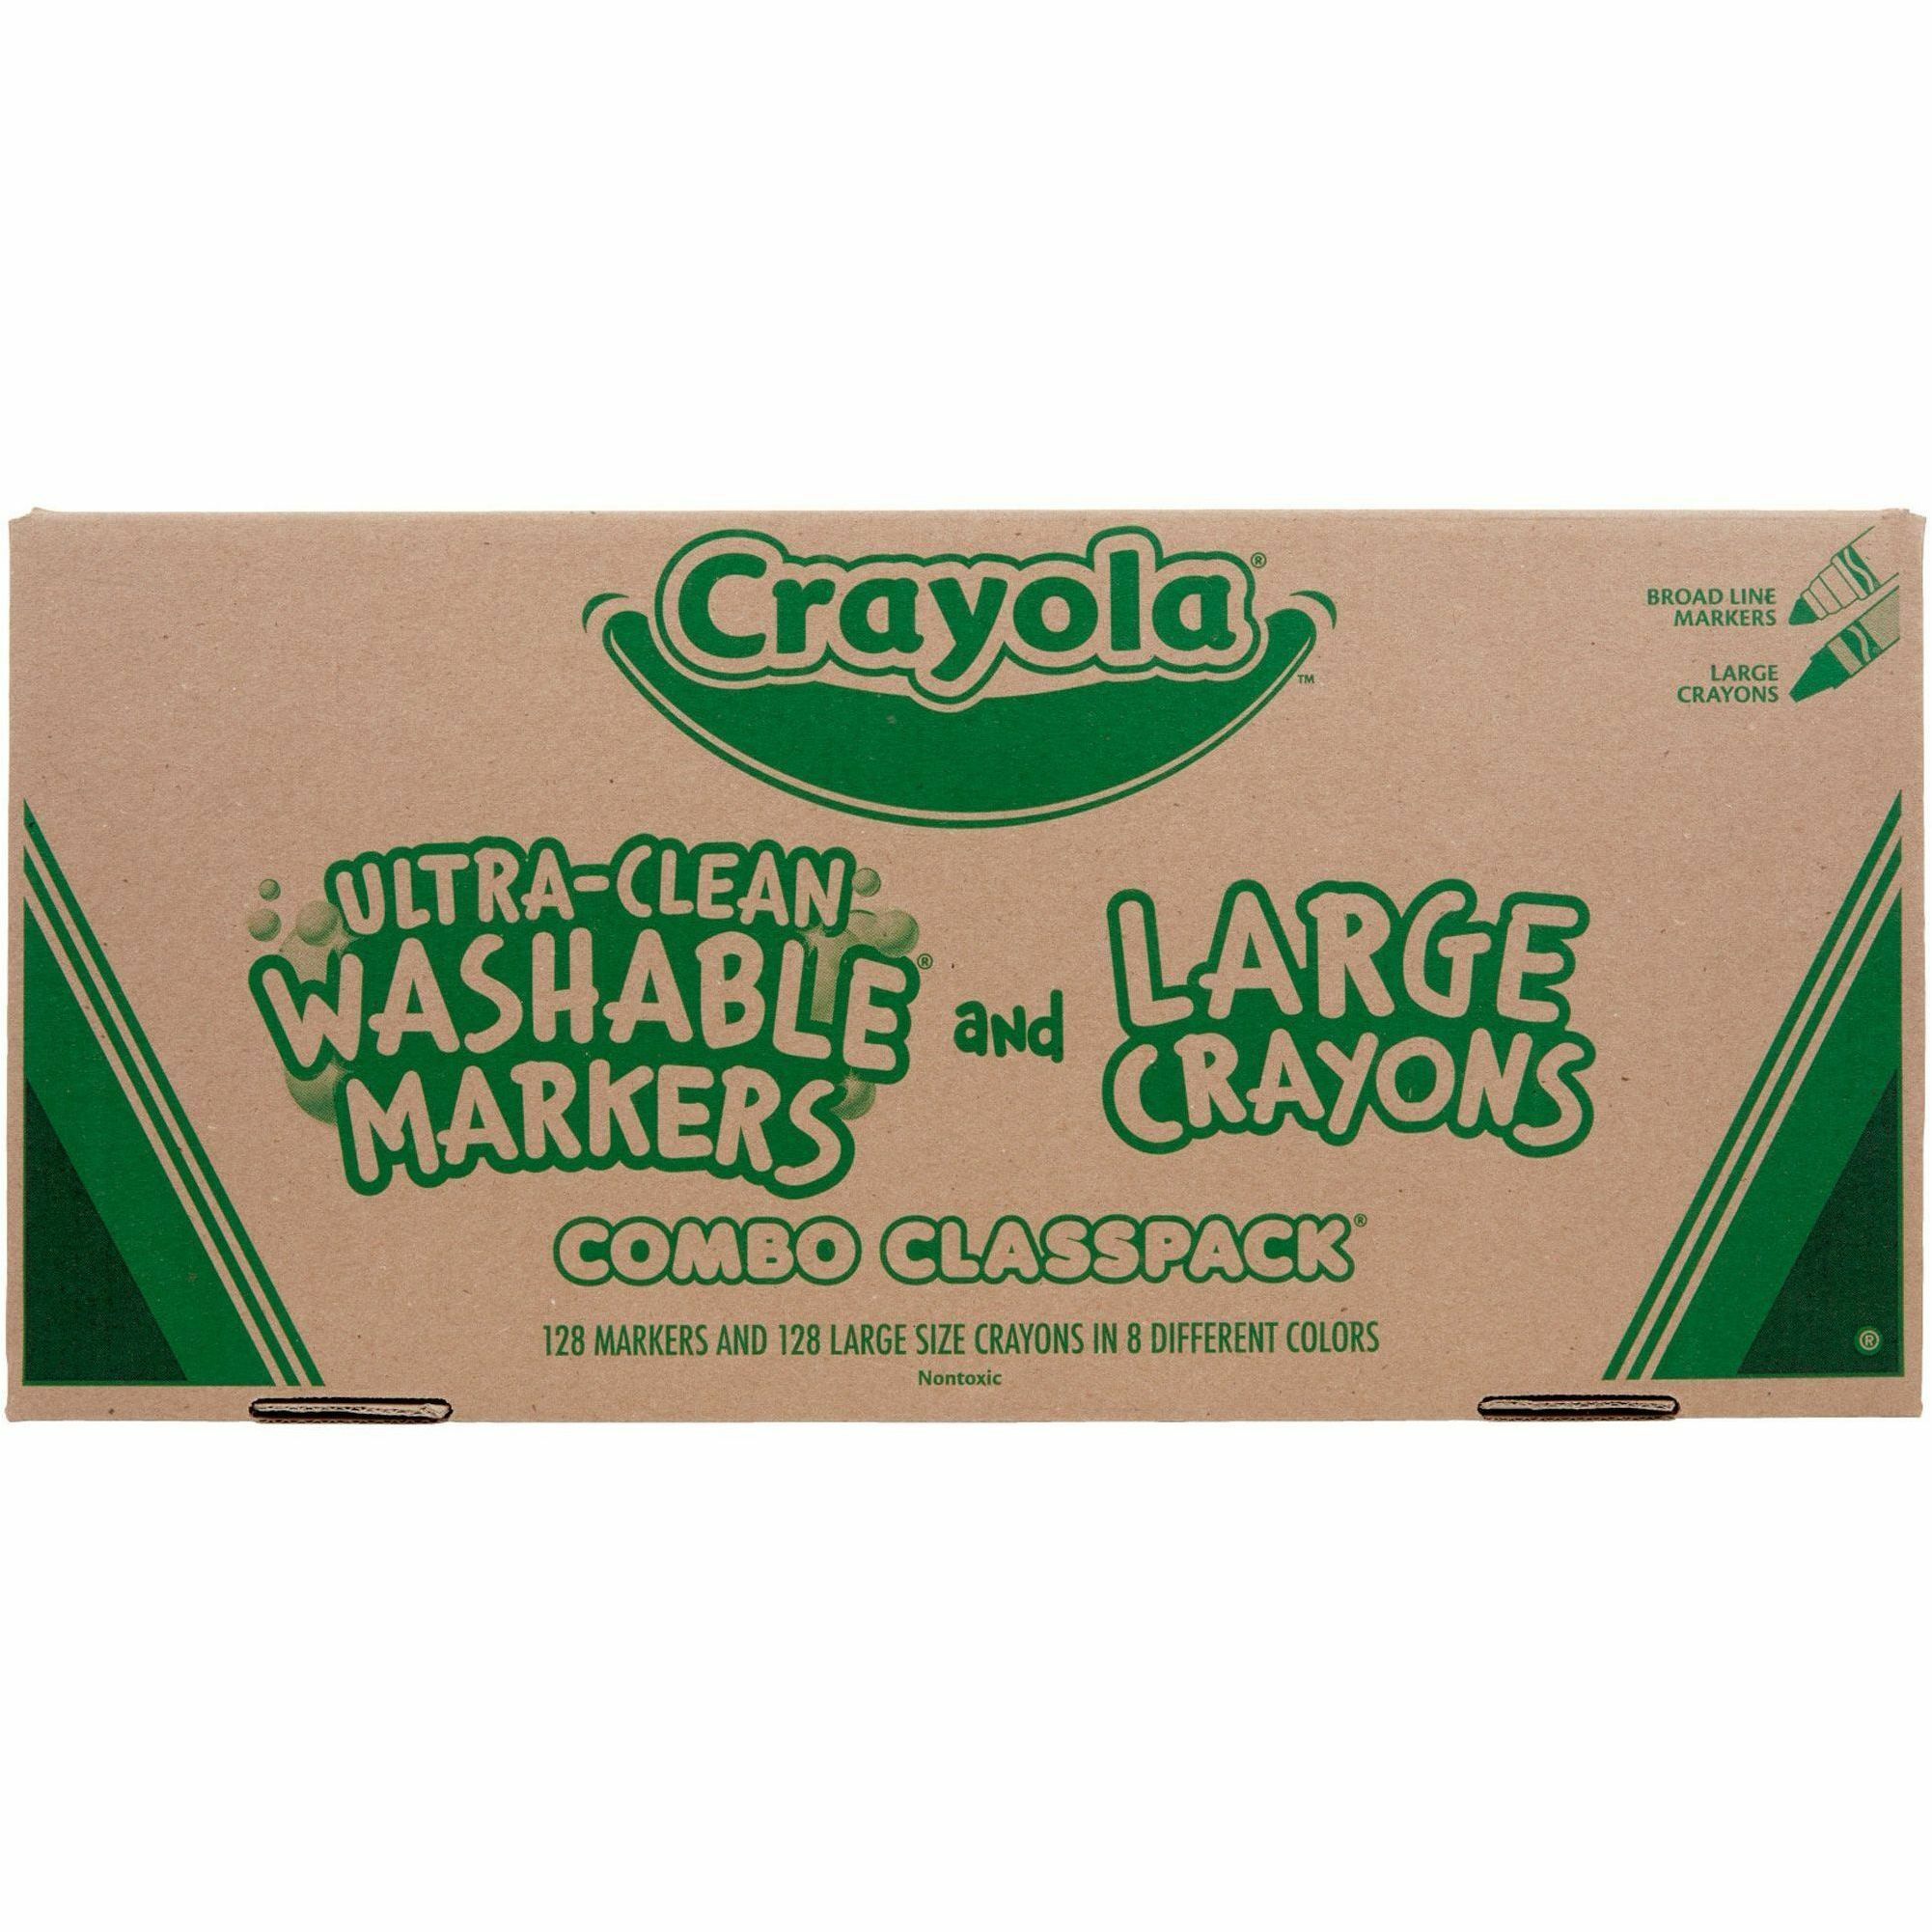 Crayola Large Ultra Clean Washable Crayons, Classic Colors, 8